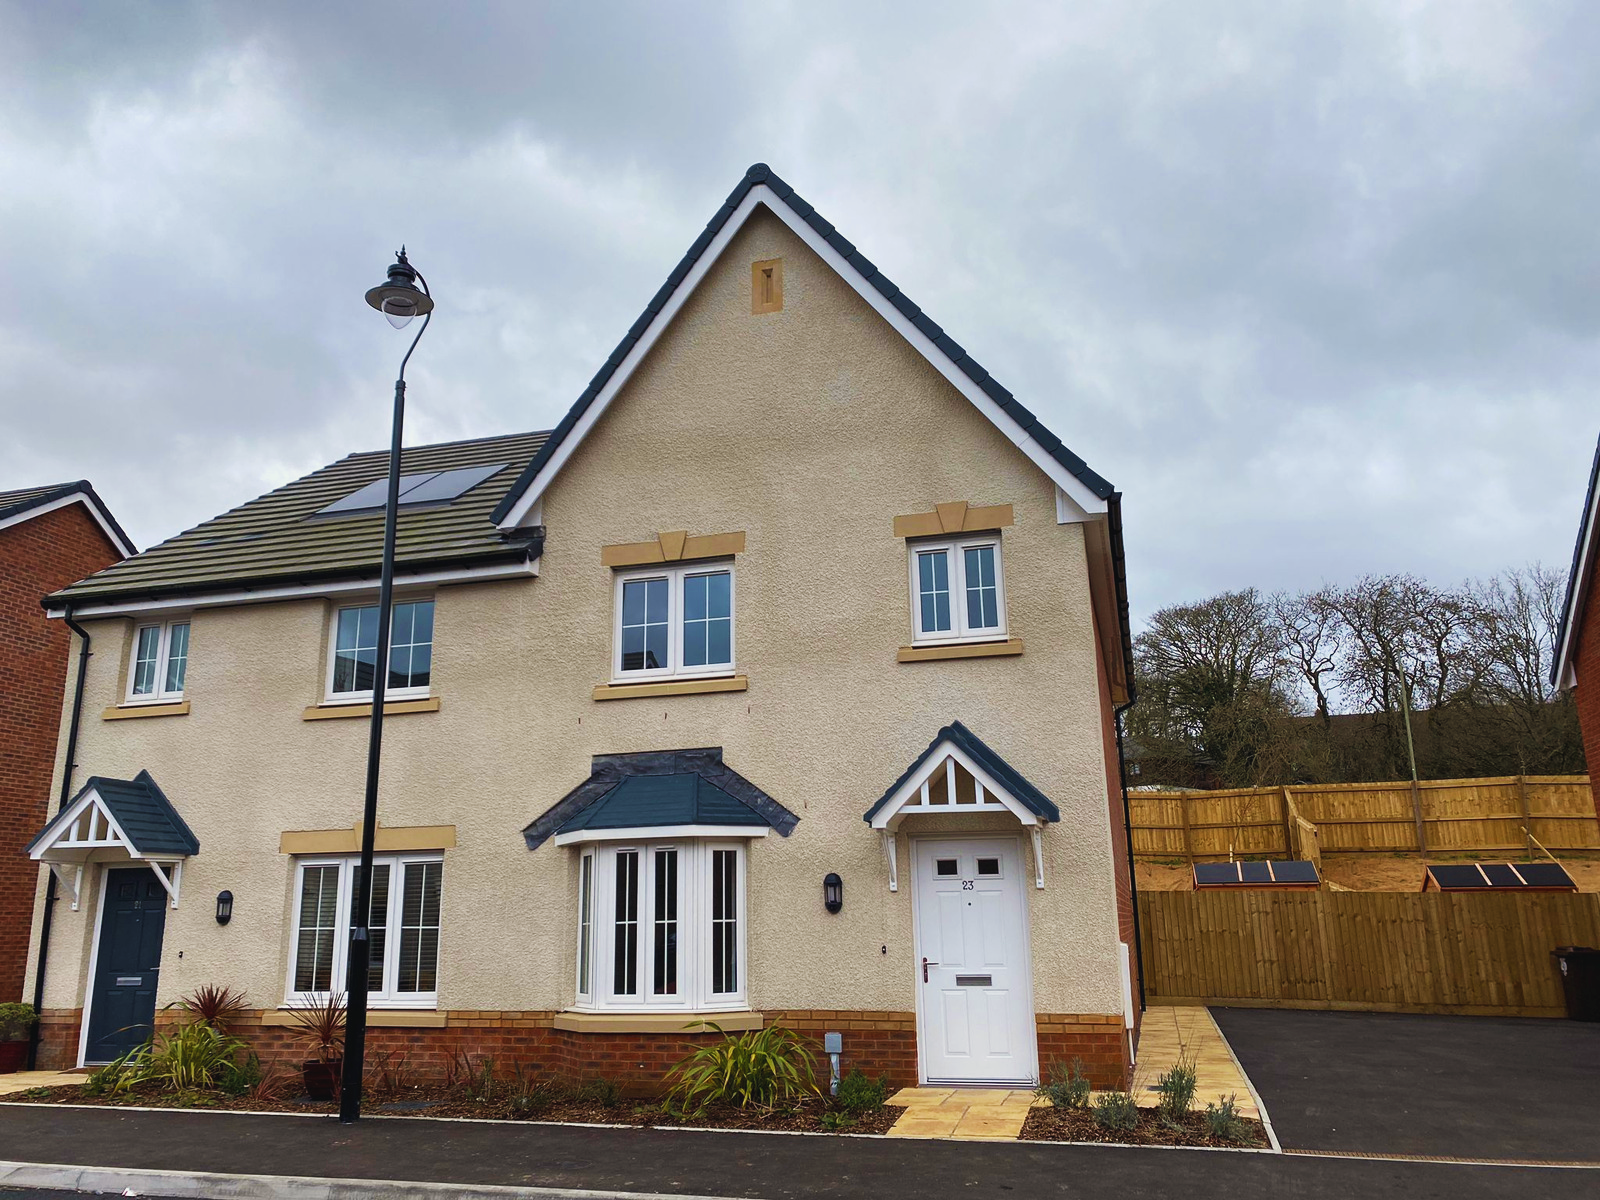 An external photo of a home on the Wheel View development in Hengoed, Caerphilly.